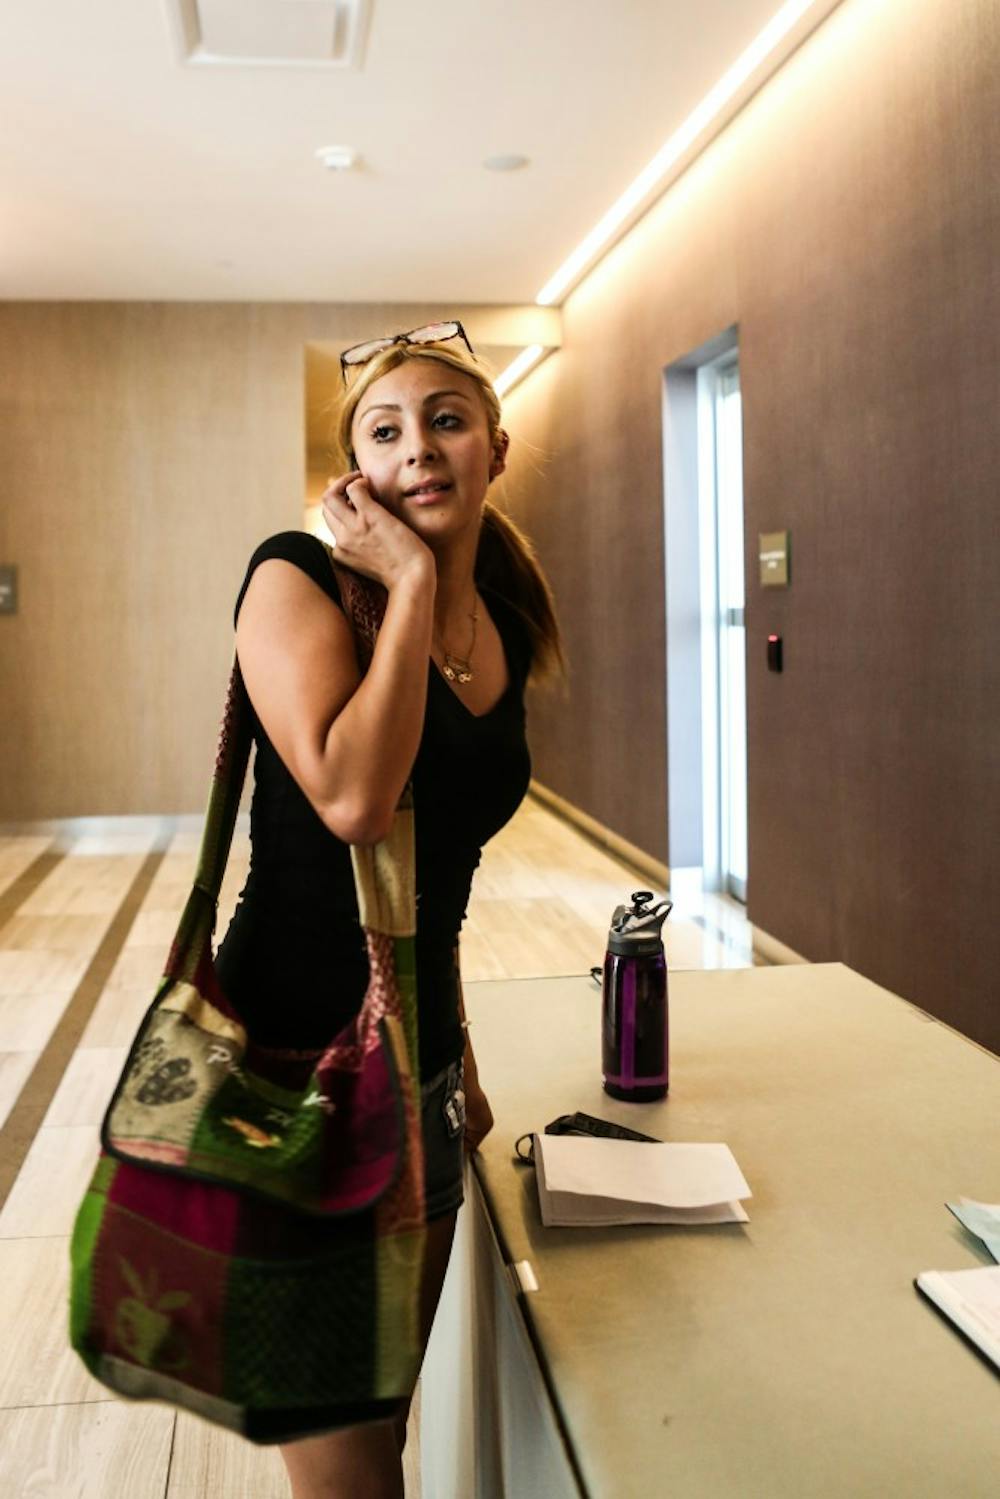 Health policy freshman Jasmine Diaz checks in with ASU officials at the Westin hotel. Taylor Place was over booked and the Westin Hotel is renting rooms to students. (Photo by Dominic Valente)